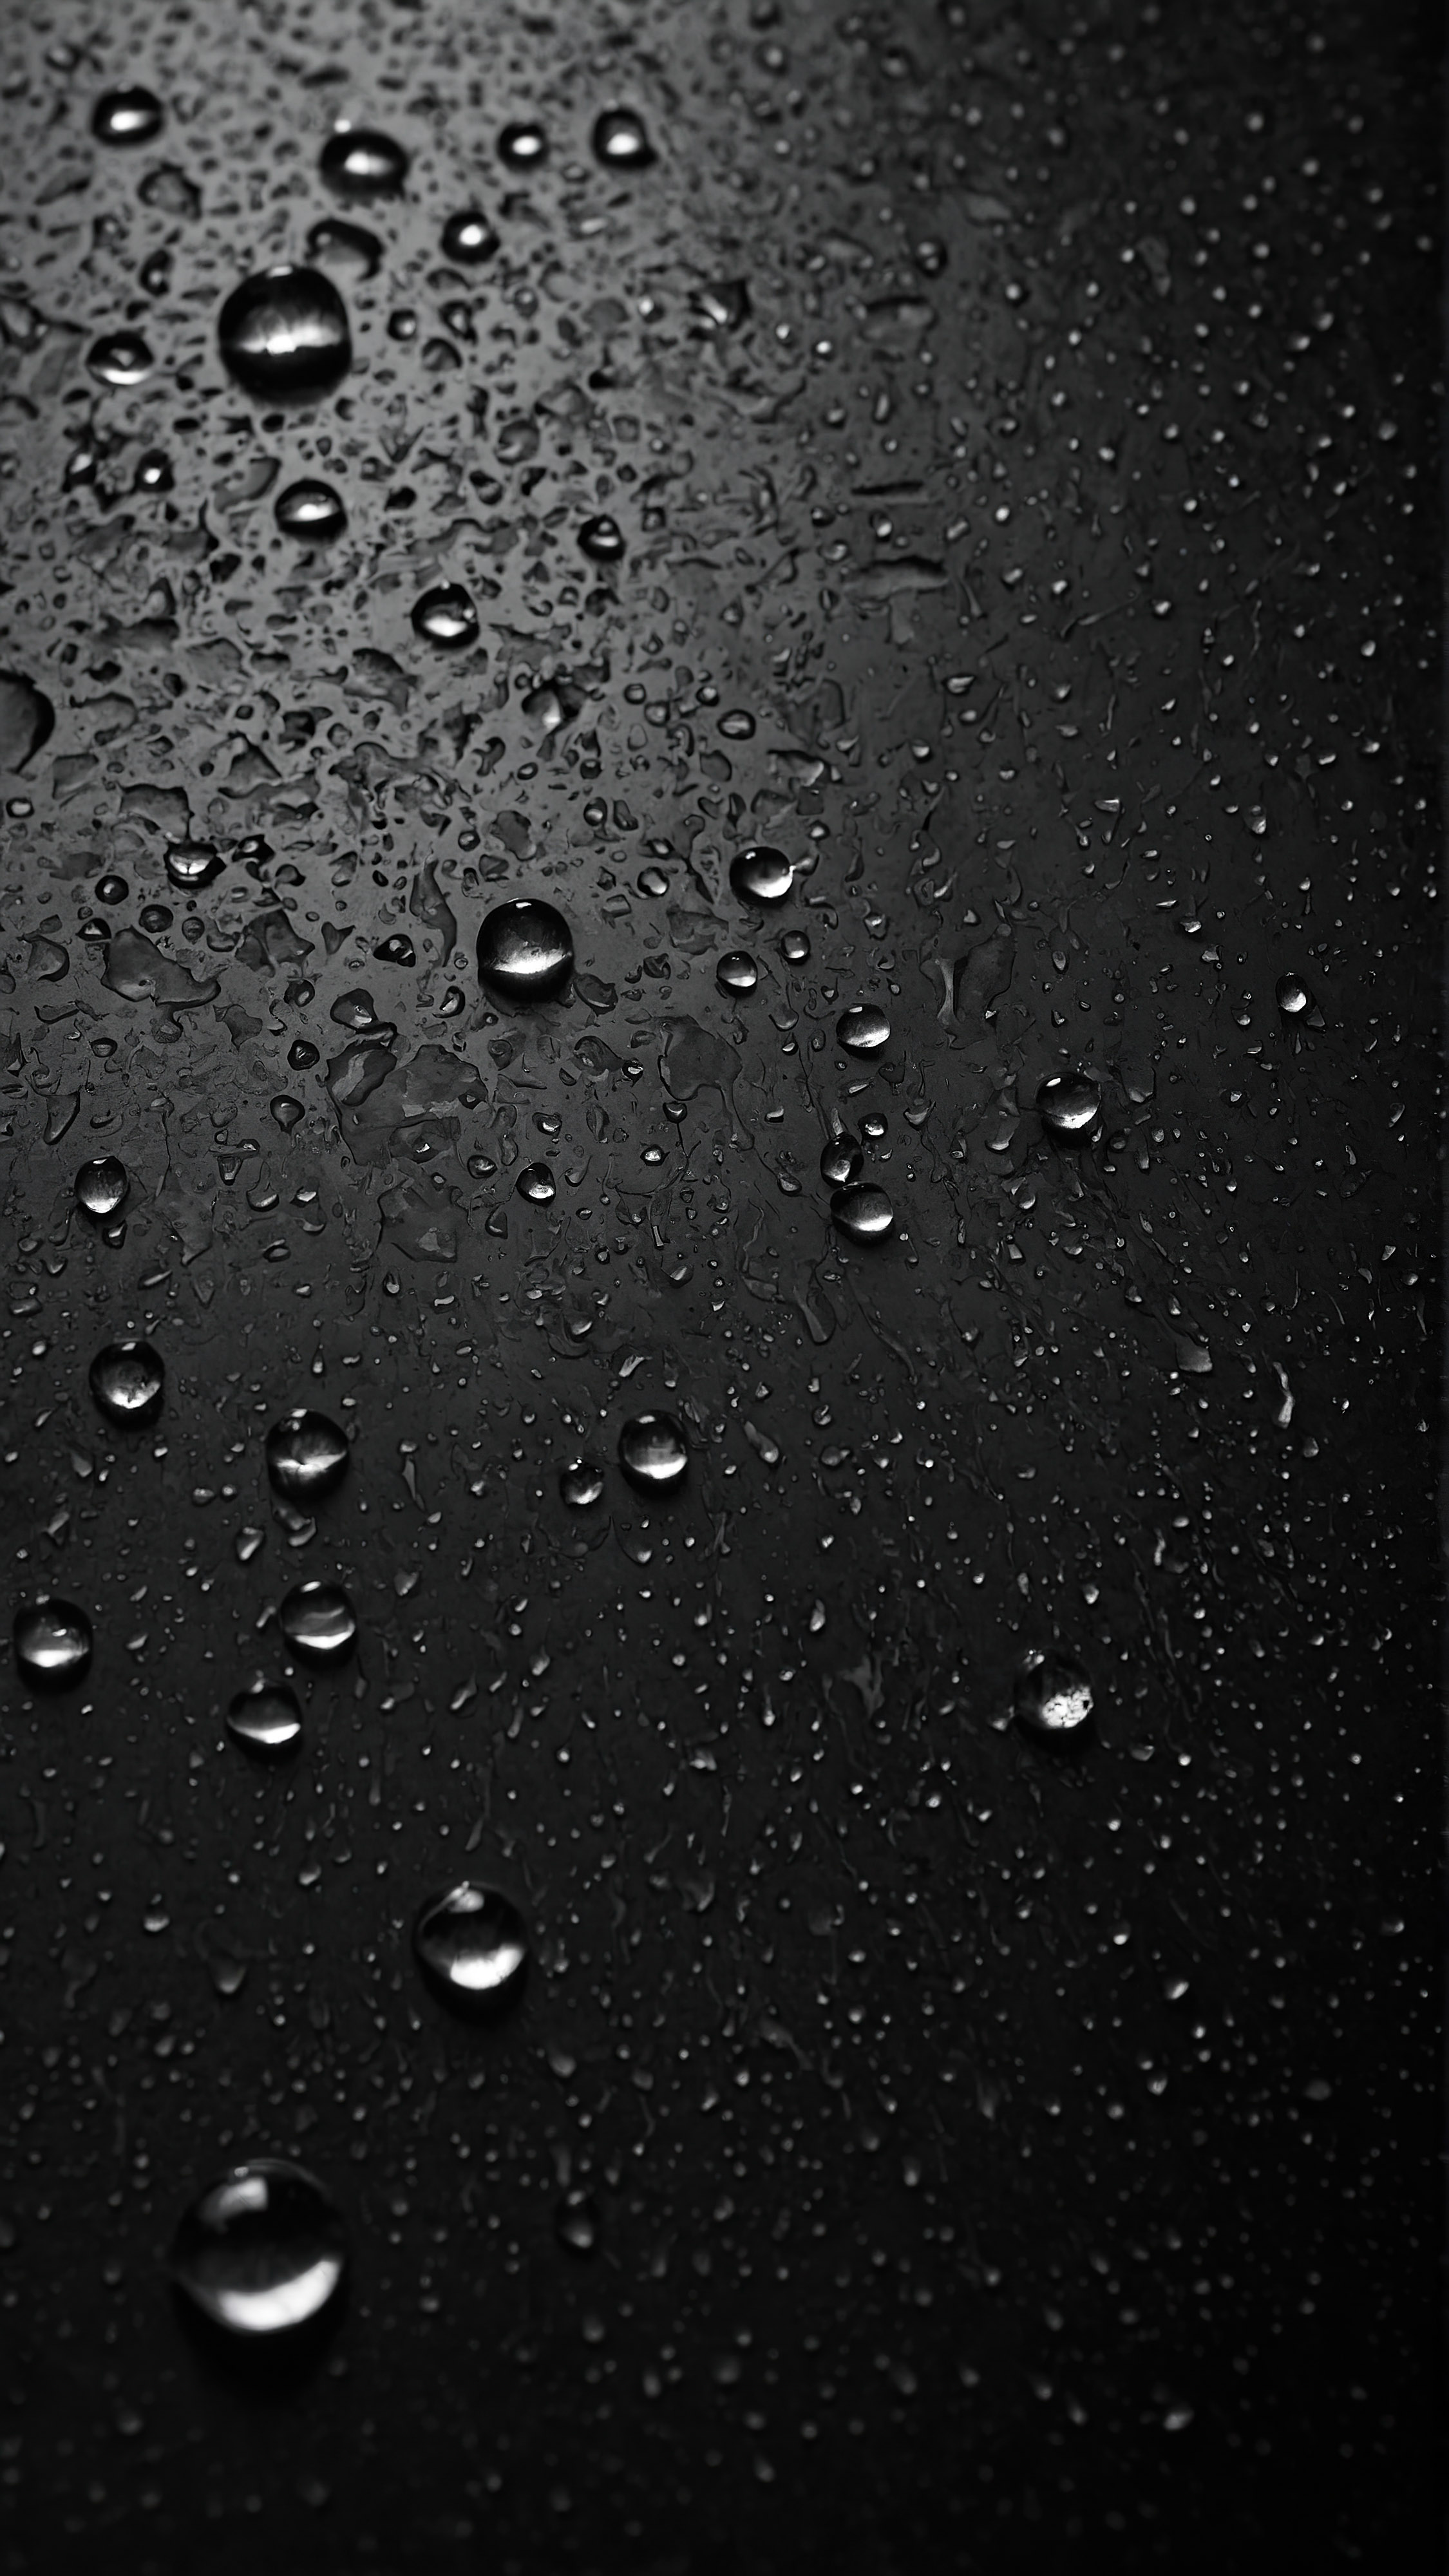 Feel the texture of water droplets on a dark surface, captured in our background black iPhone wallpaper.